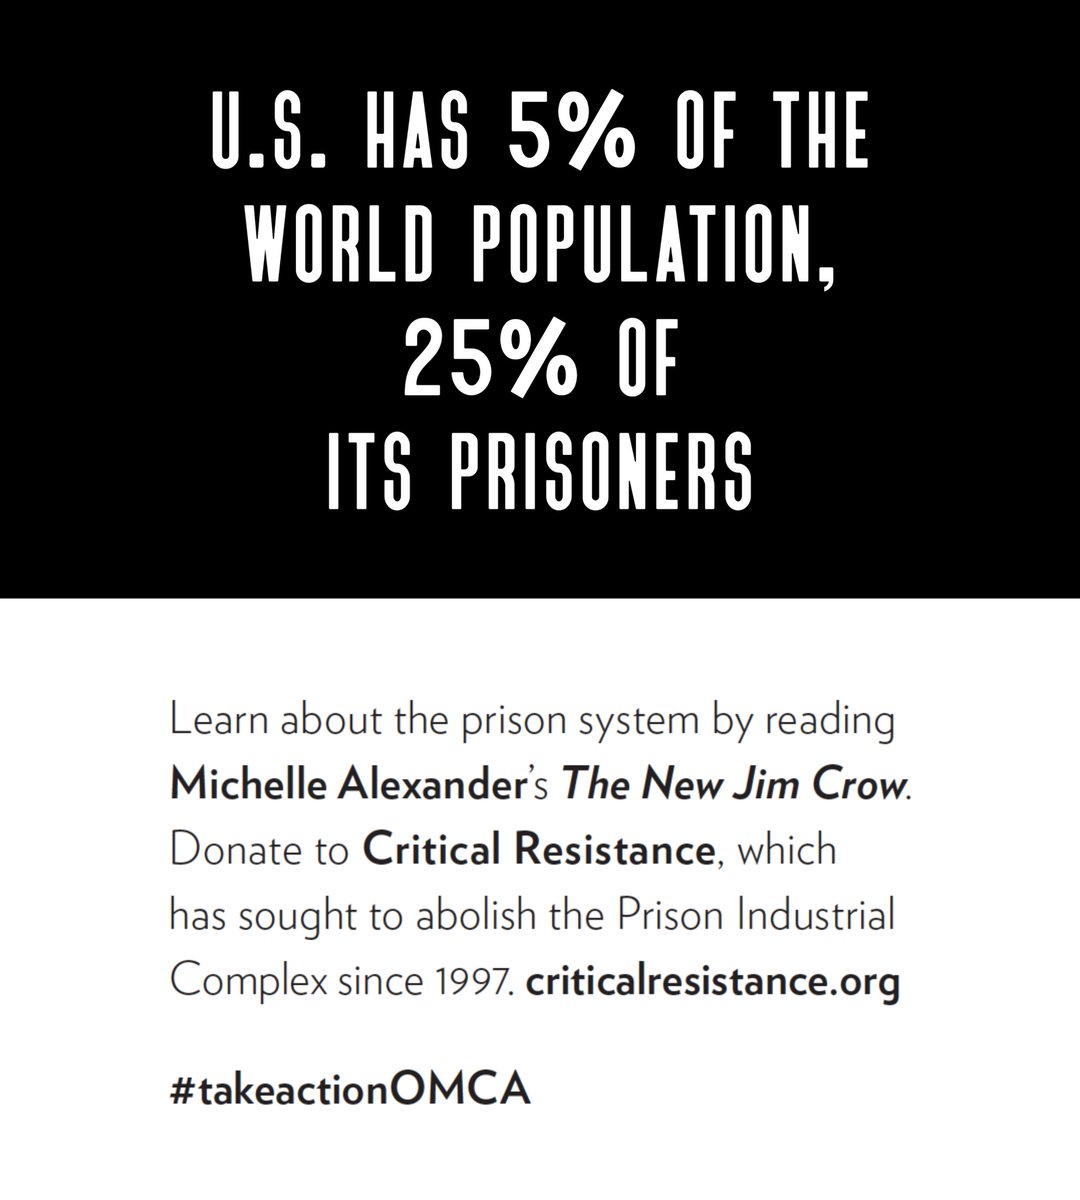 U.S. HAS 5% OF THE WORLD POPULATION, 25% OF ITS PRISONERS